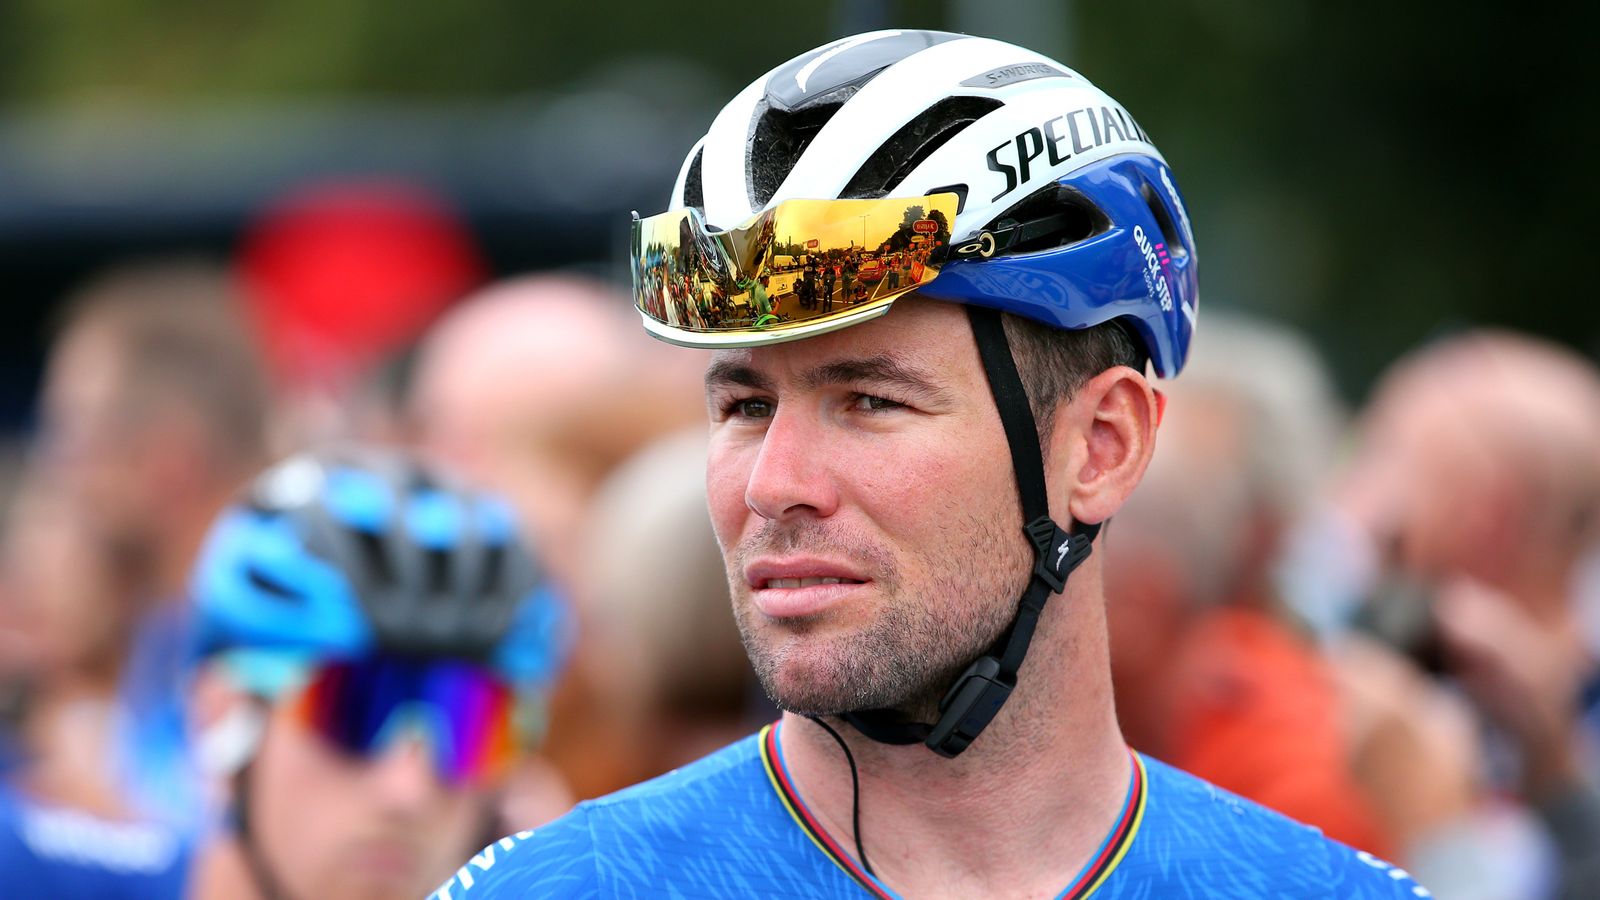 Mark Cavendish subjected to knifepoint robbery while at home with family, court told